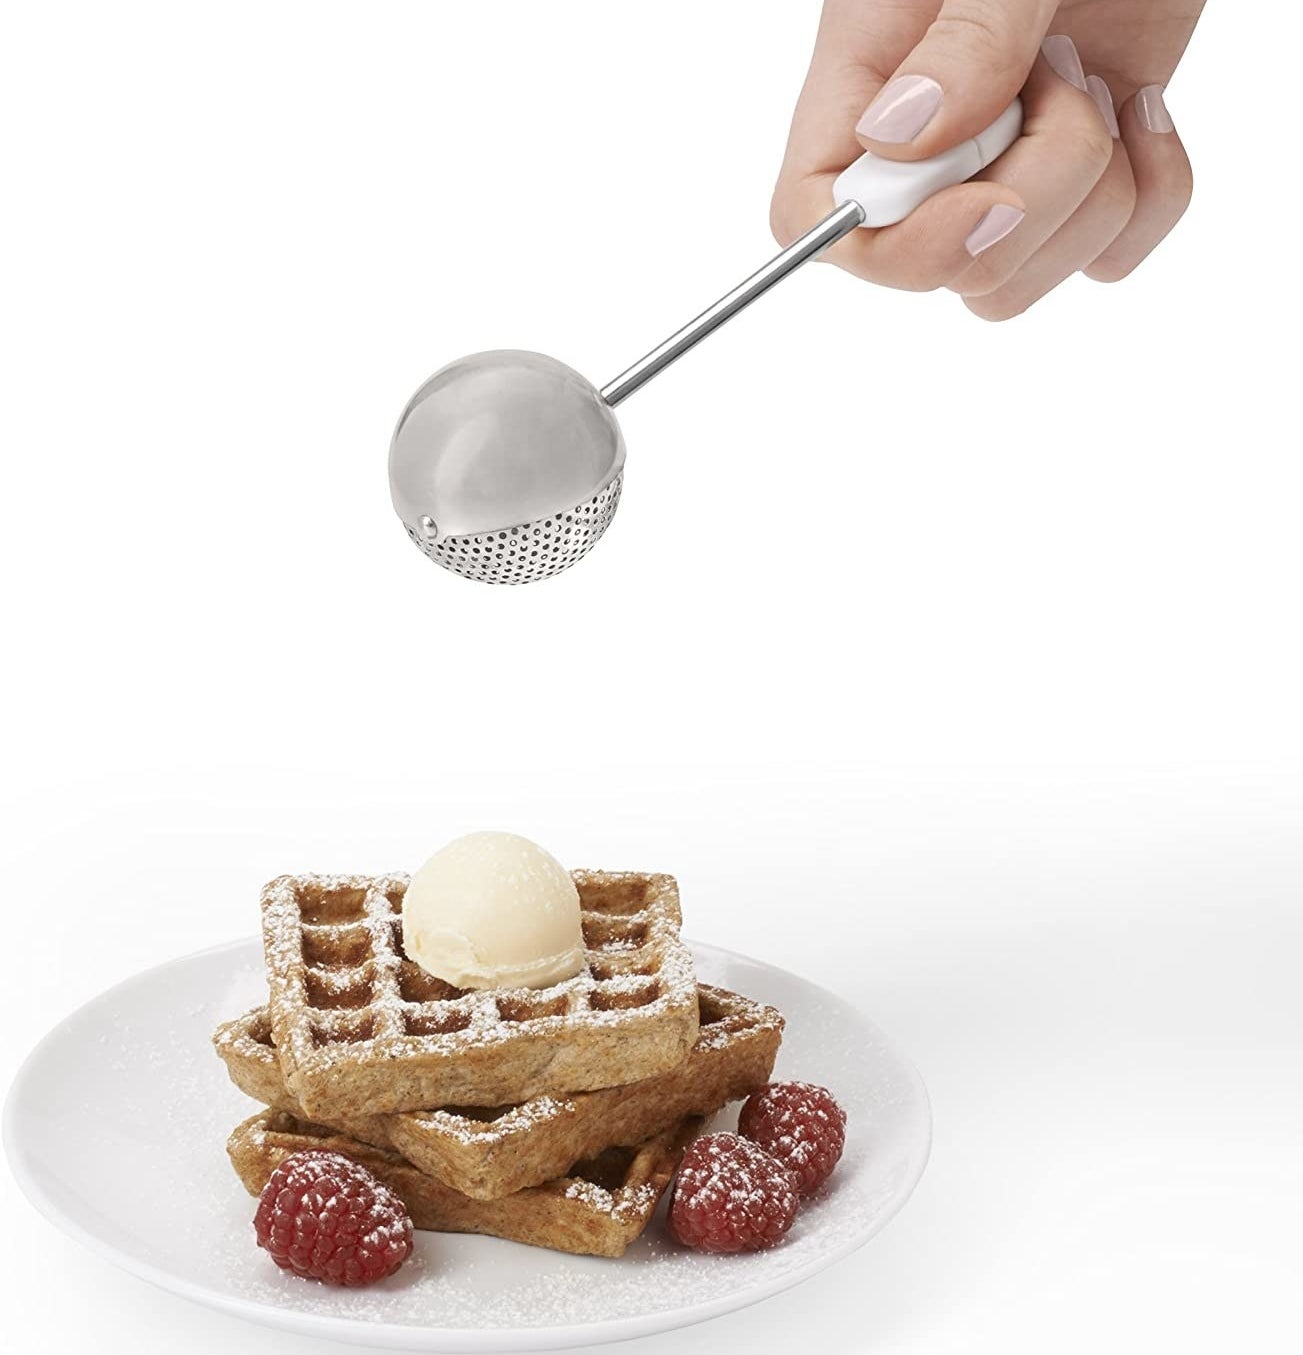 Model&#x27;s hand using the dusting wand to sprinkle powdered sugar on a stack of waffles